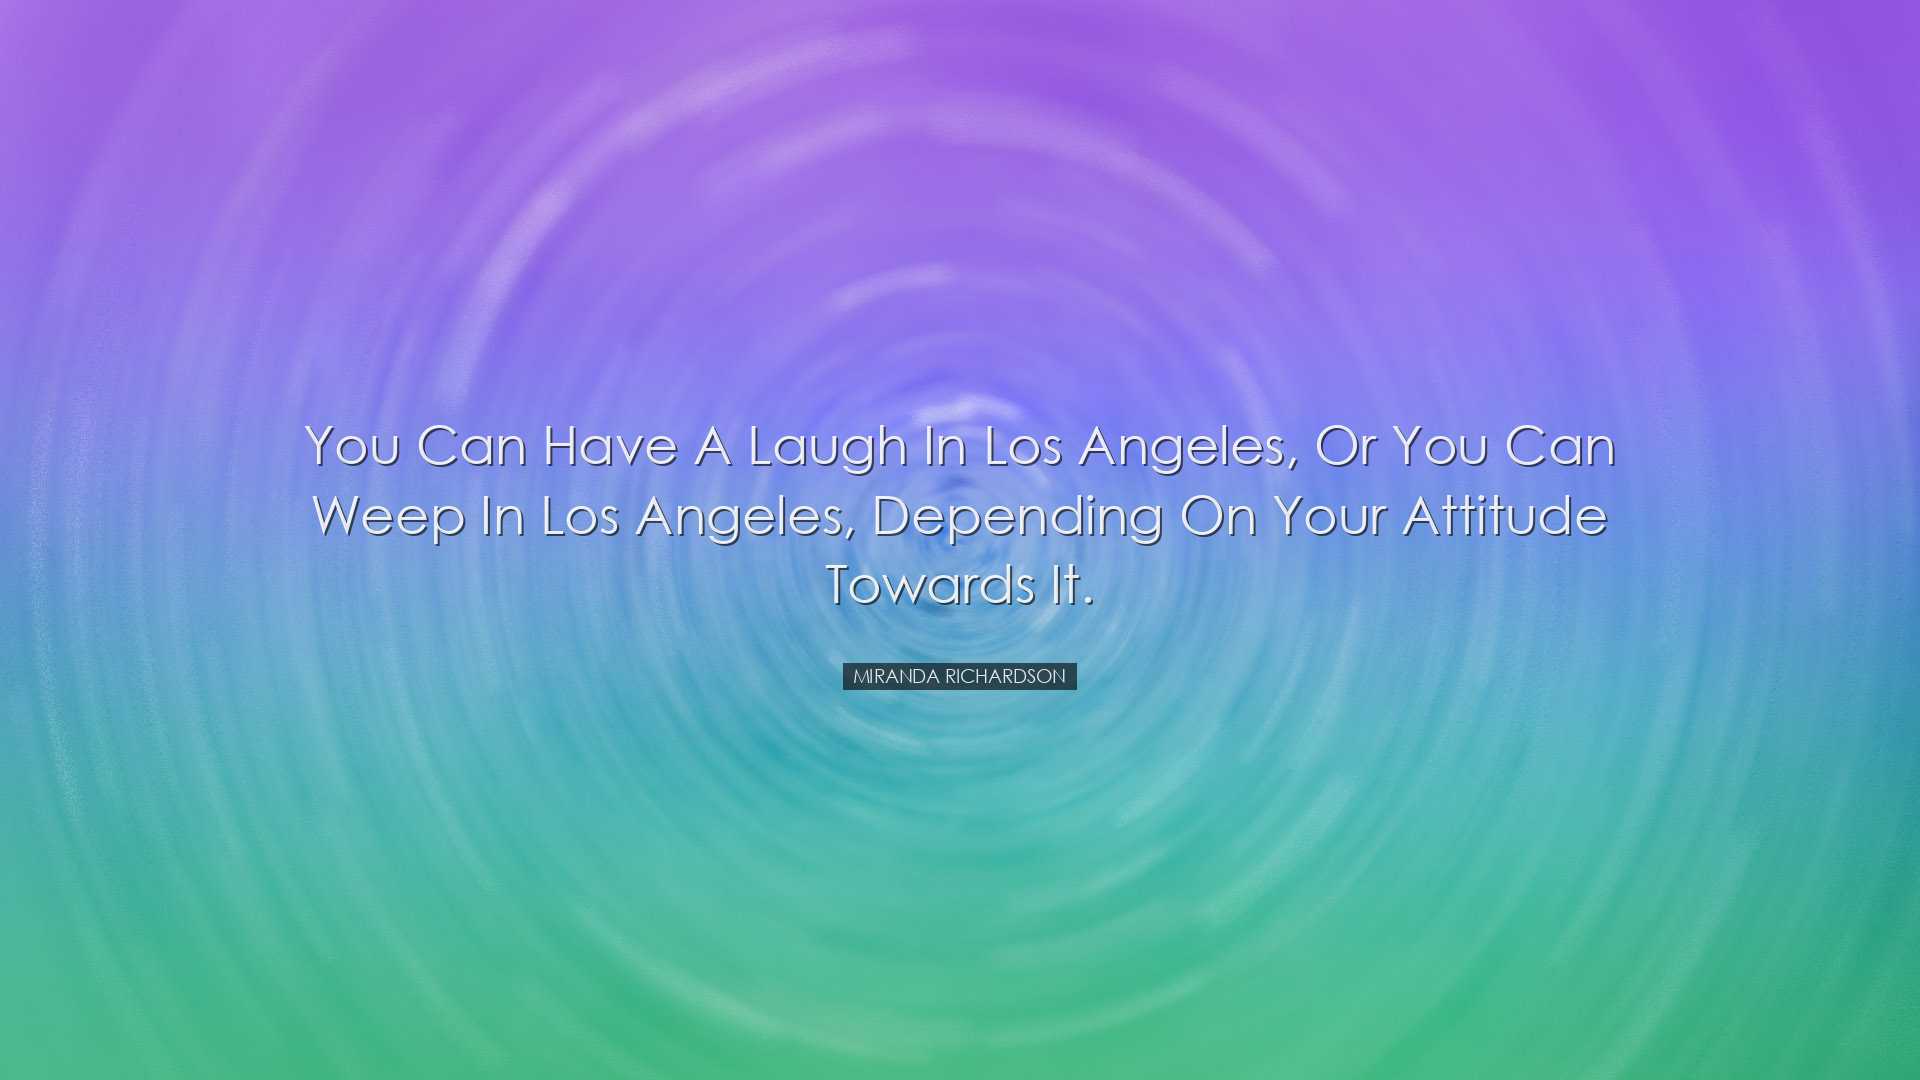 You can have a laugh in Los Angeles, or you can weep in Los Angele